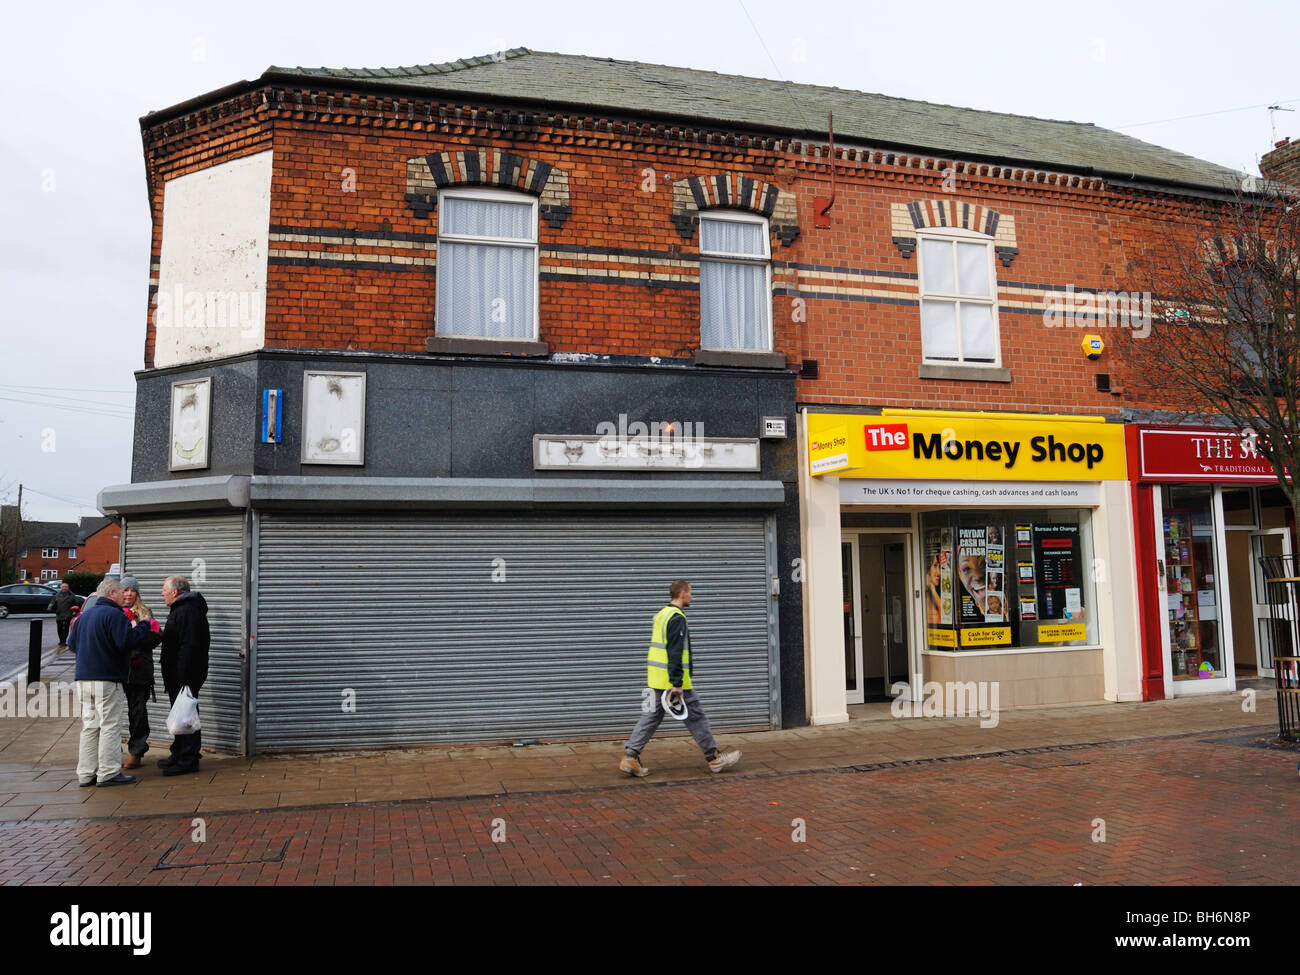 The newly opened Money Shop in Widnes, Cheshire, situated next to a closed and shuttered shop. Stock Photo